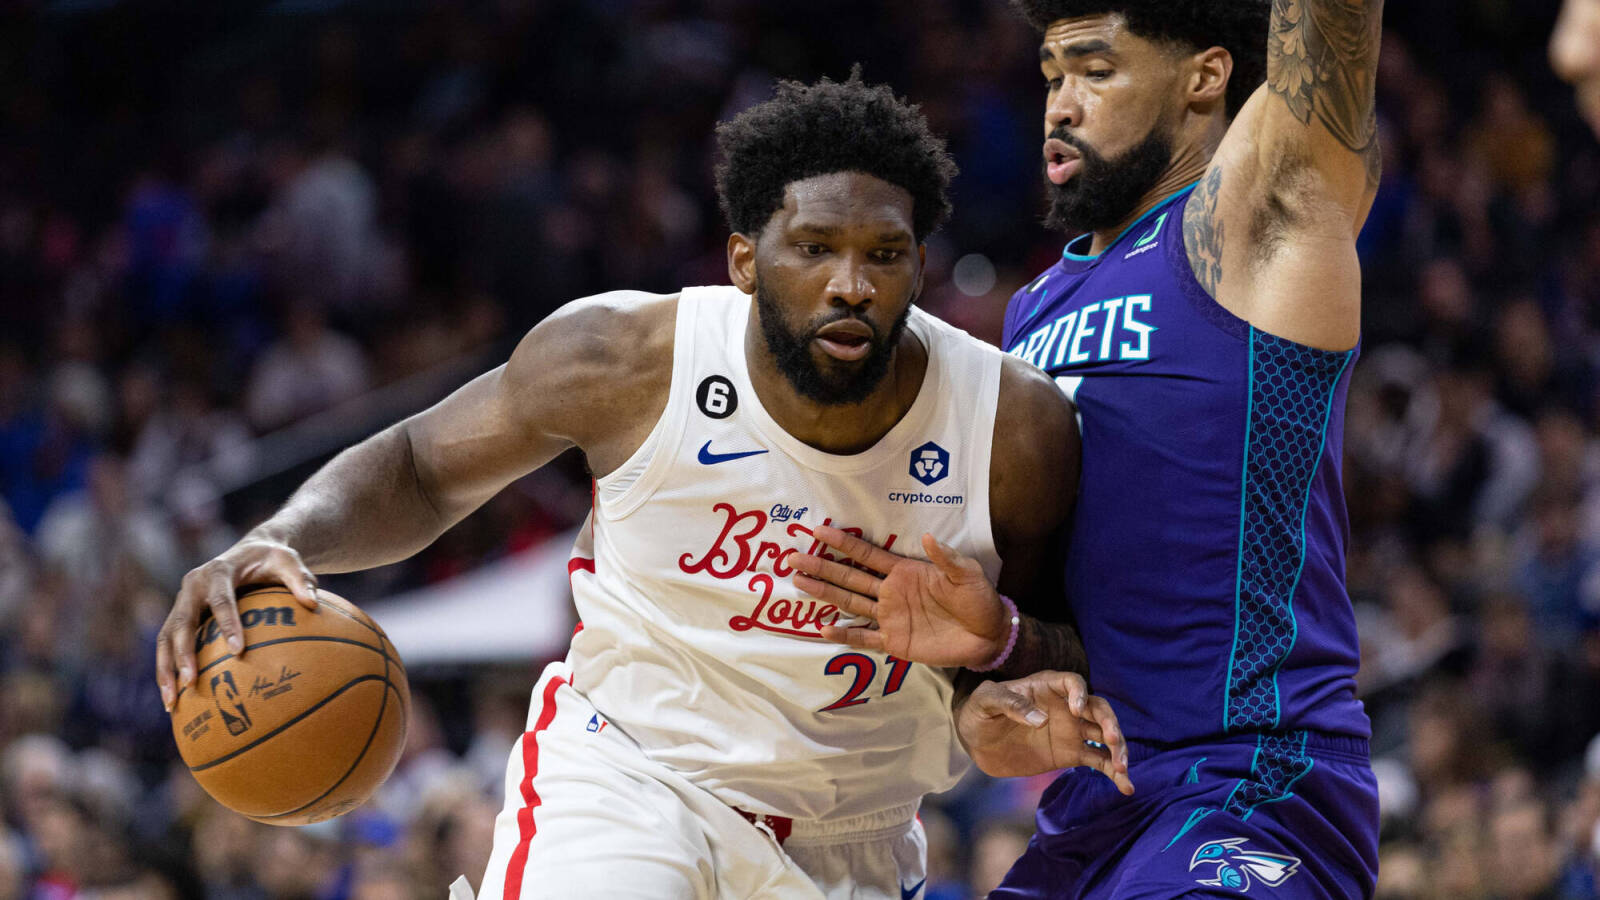 76ers' Joel Embiid accomplished feat Sunday night a center hasn't reached in nearly 30 years